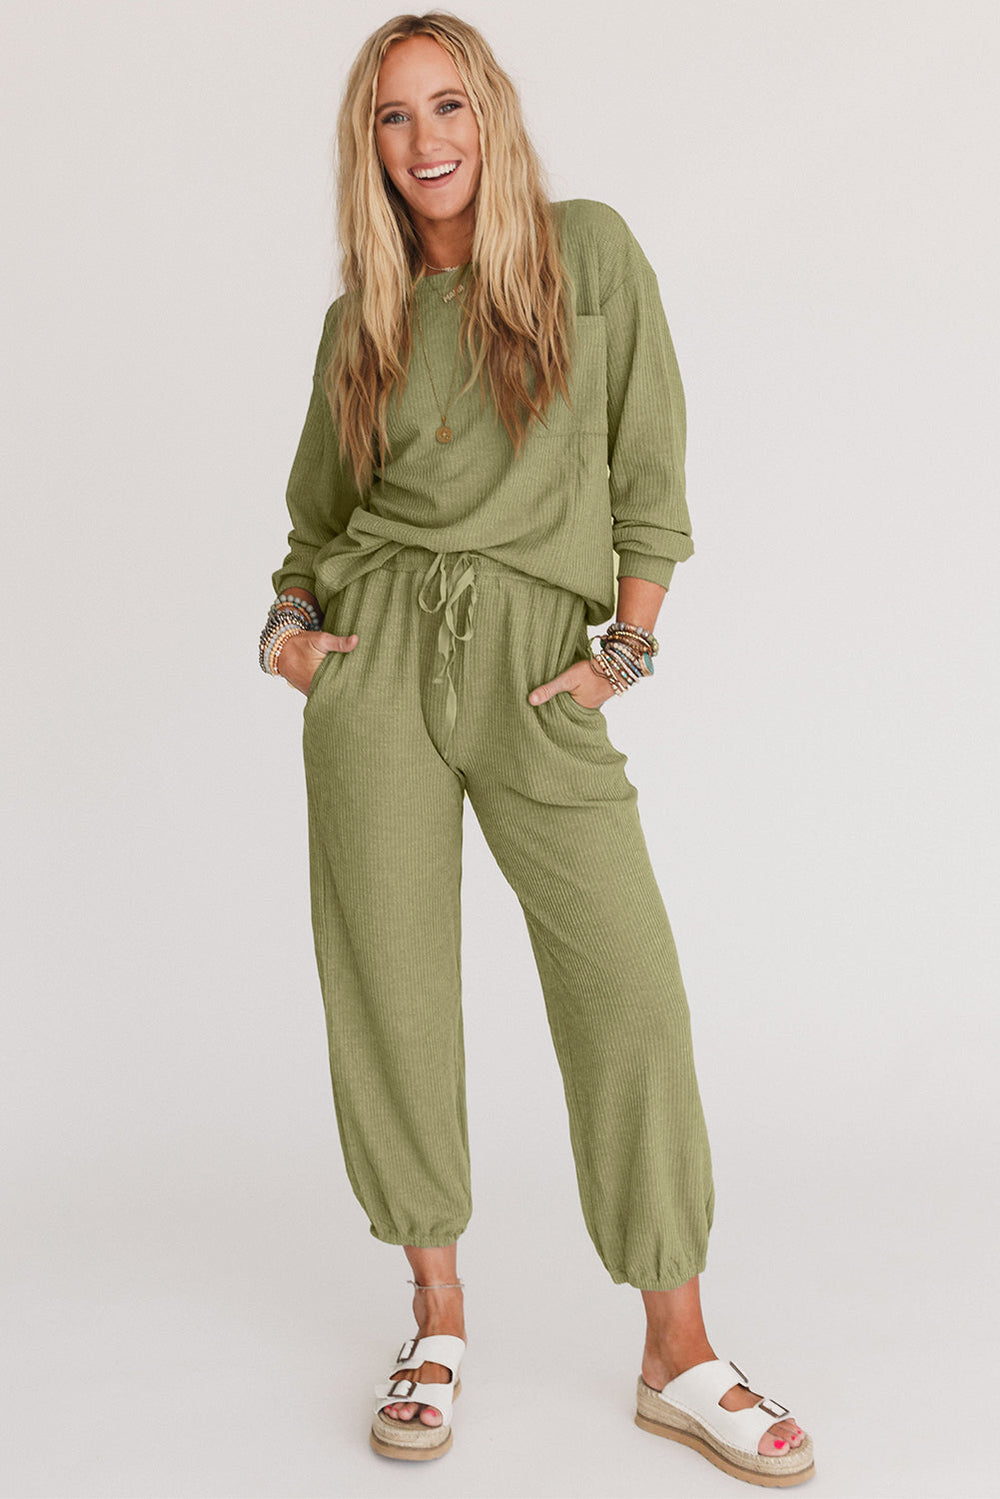 The802Gypsy  outfit sets TRAVELING GYPSY-Long Sleeve Top Drawstring Casual Set